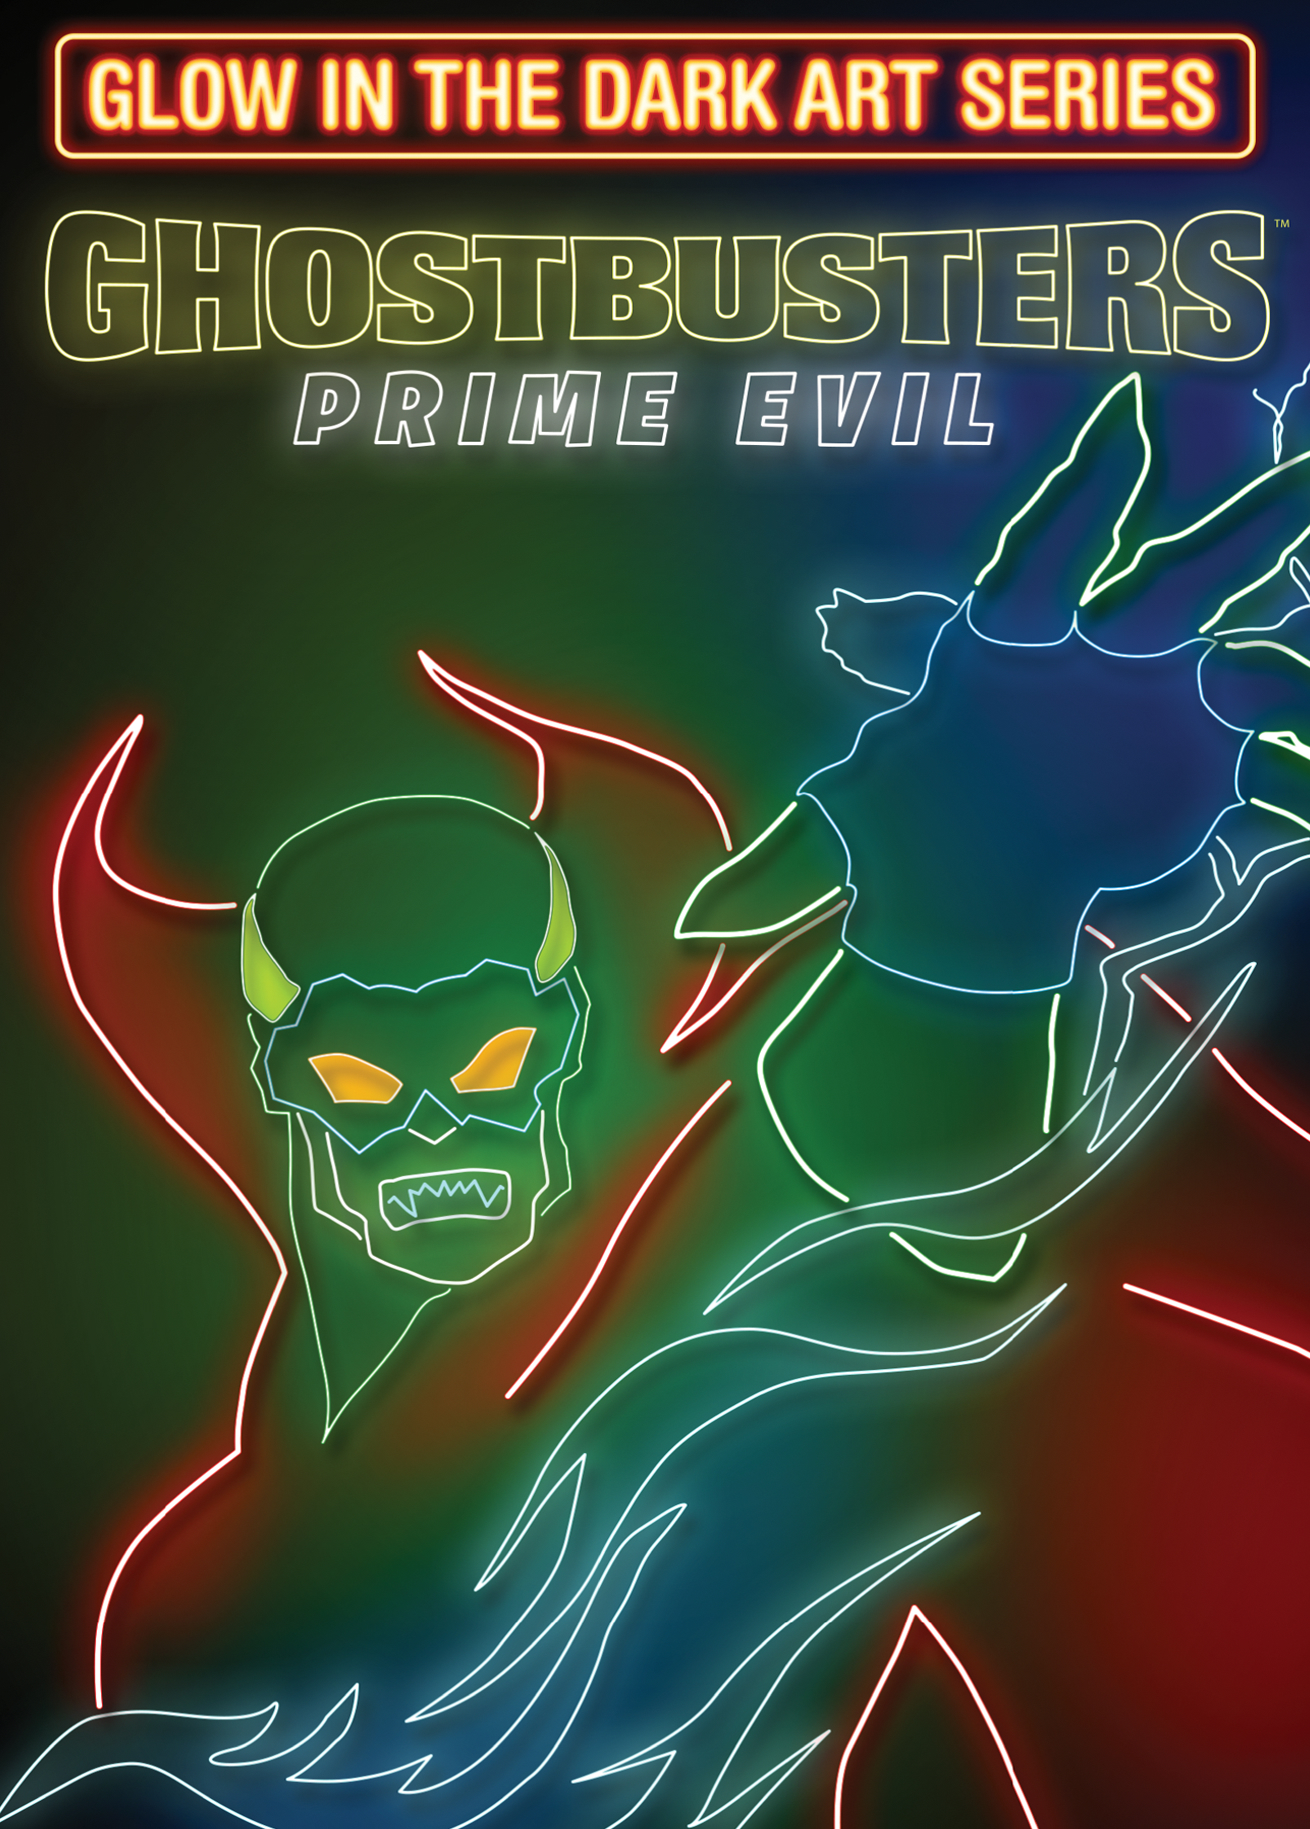 filmation ghostbusters complete series